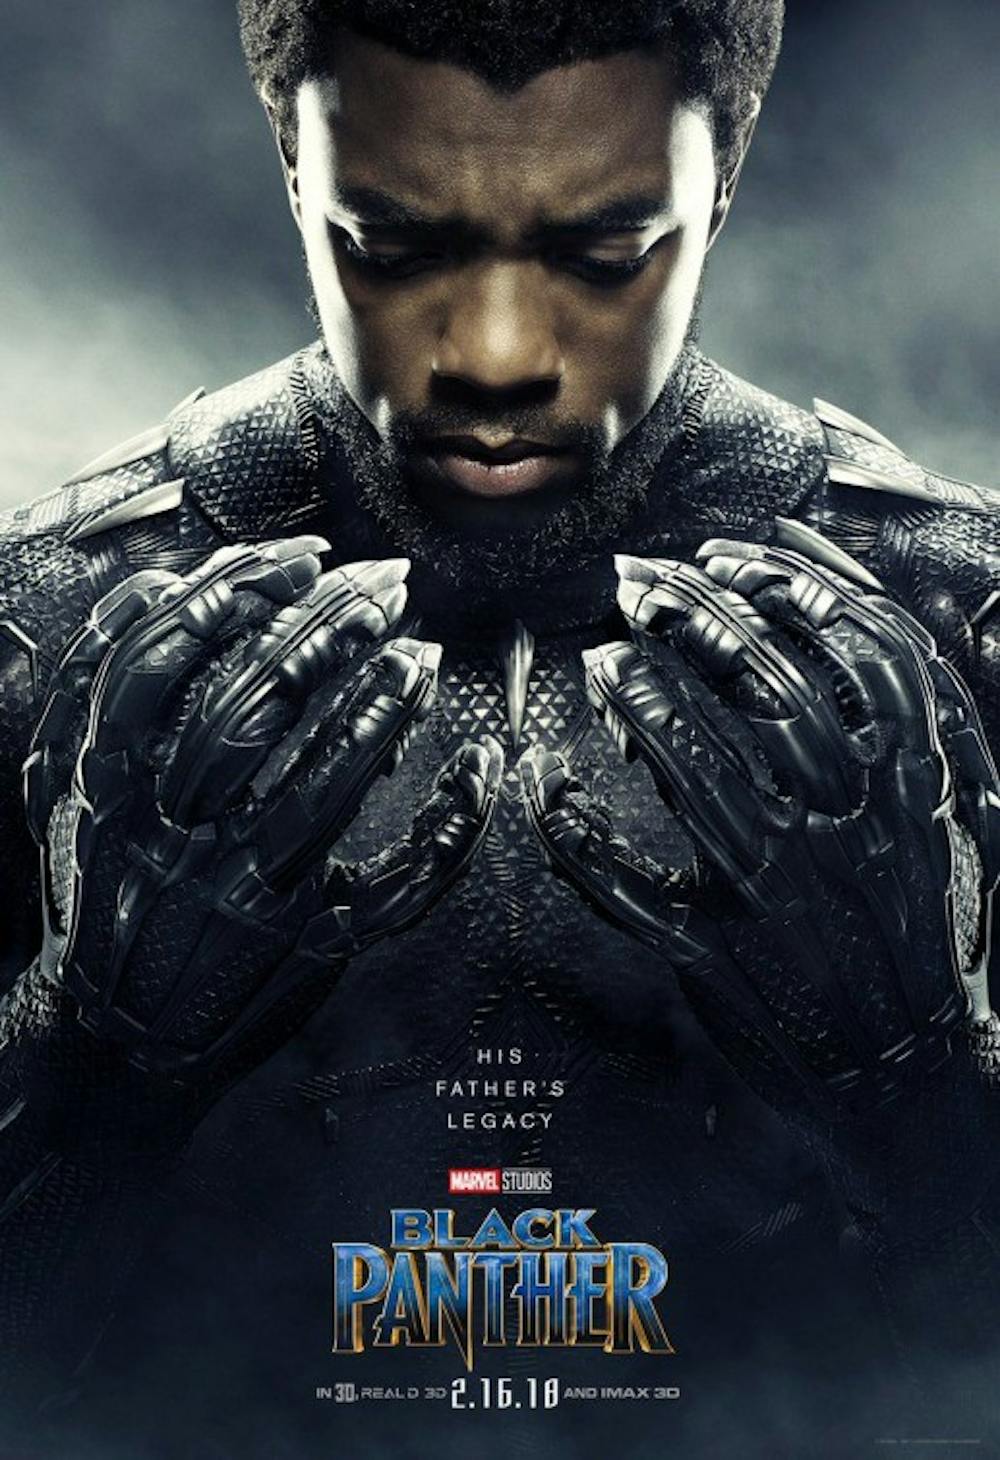 <p>"Black Panther" is one of Marvel's most successful features to date, combining the classic action and special effects with a rich cultural backdrop.</p>